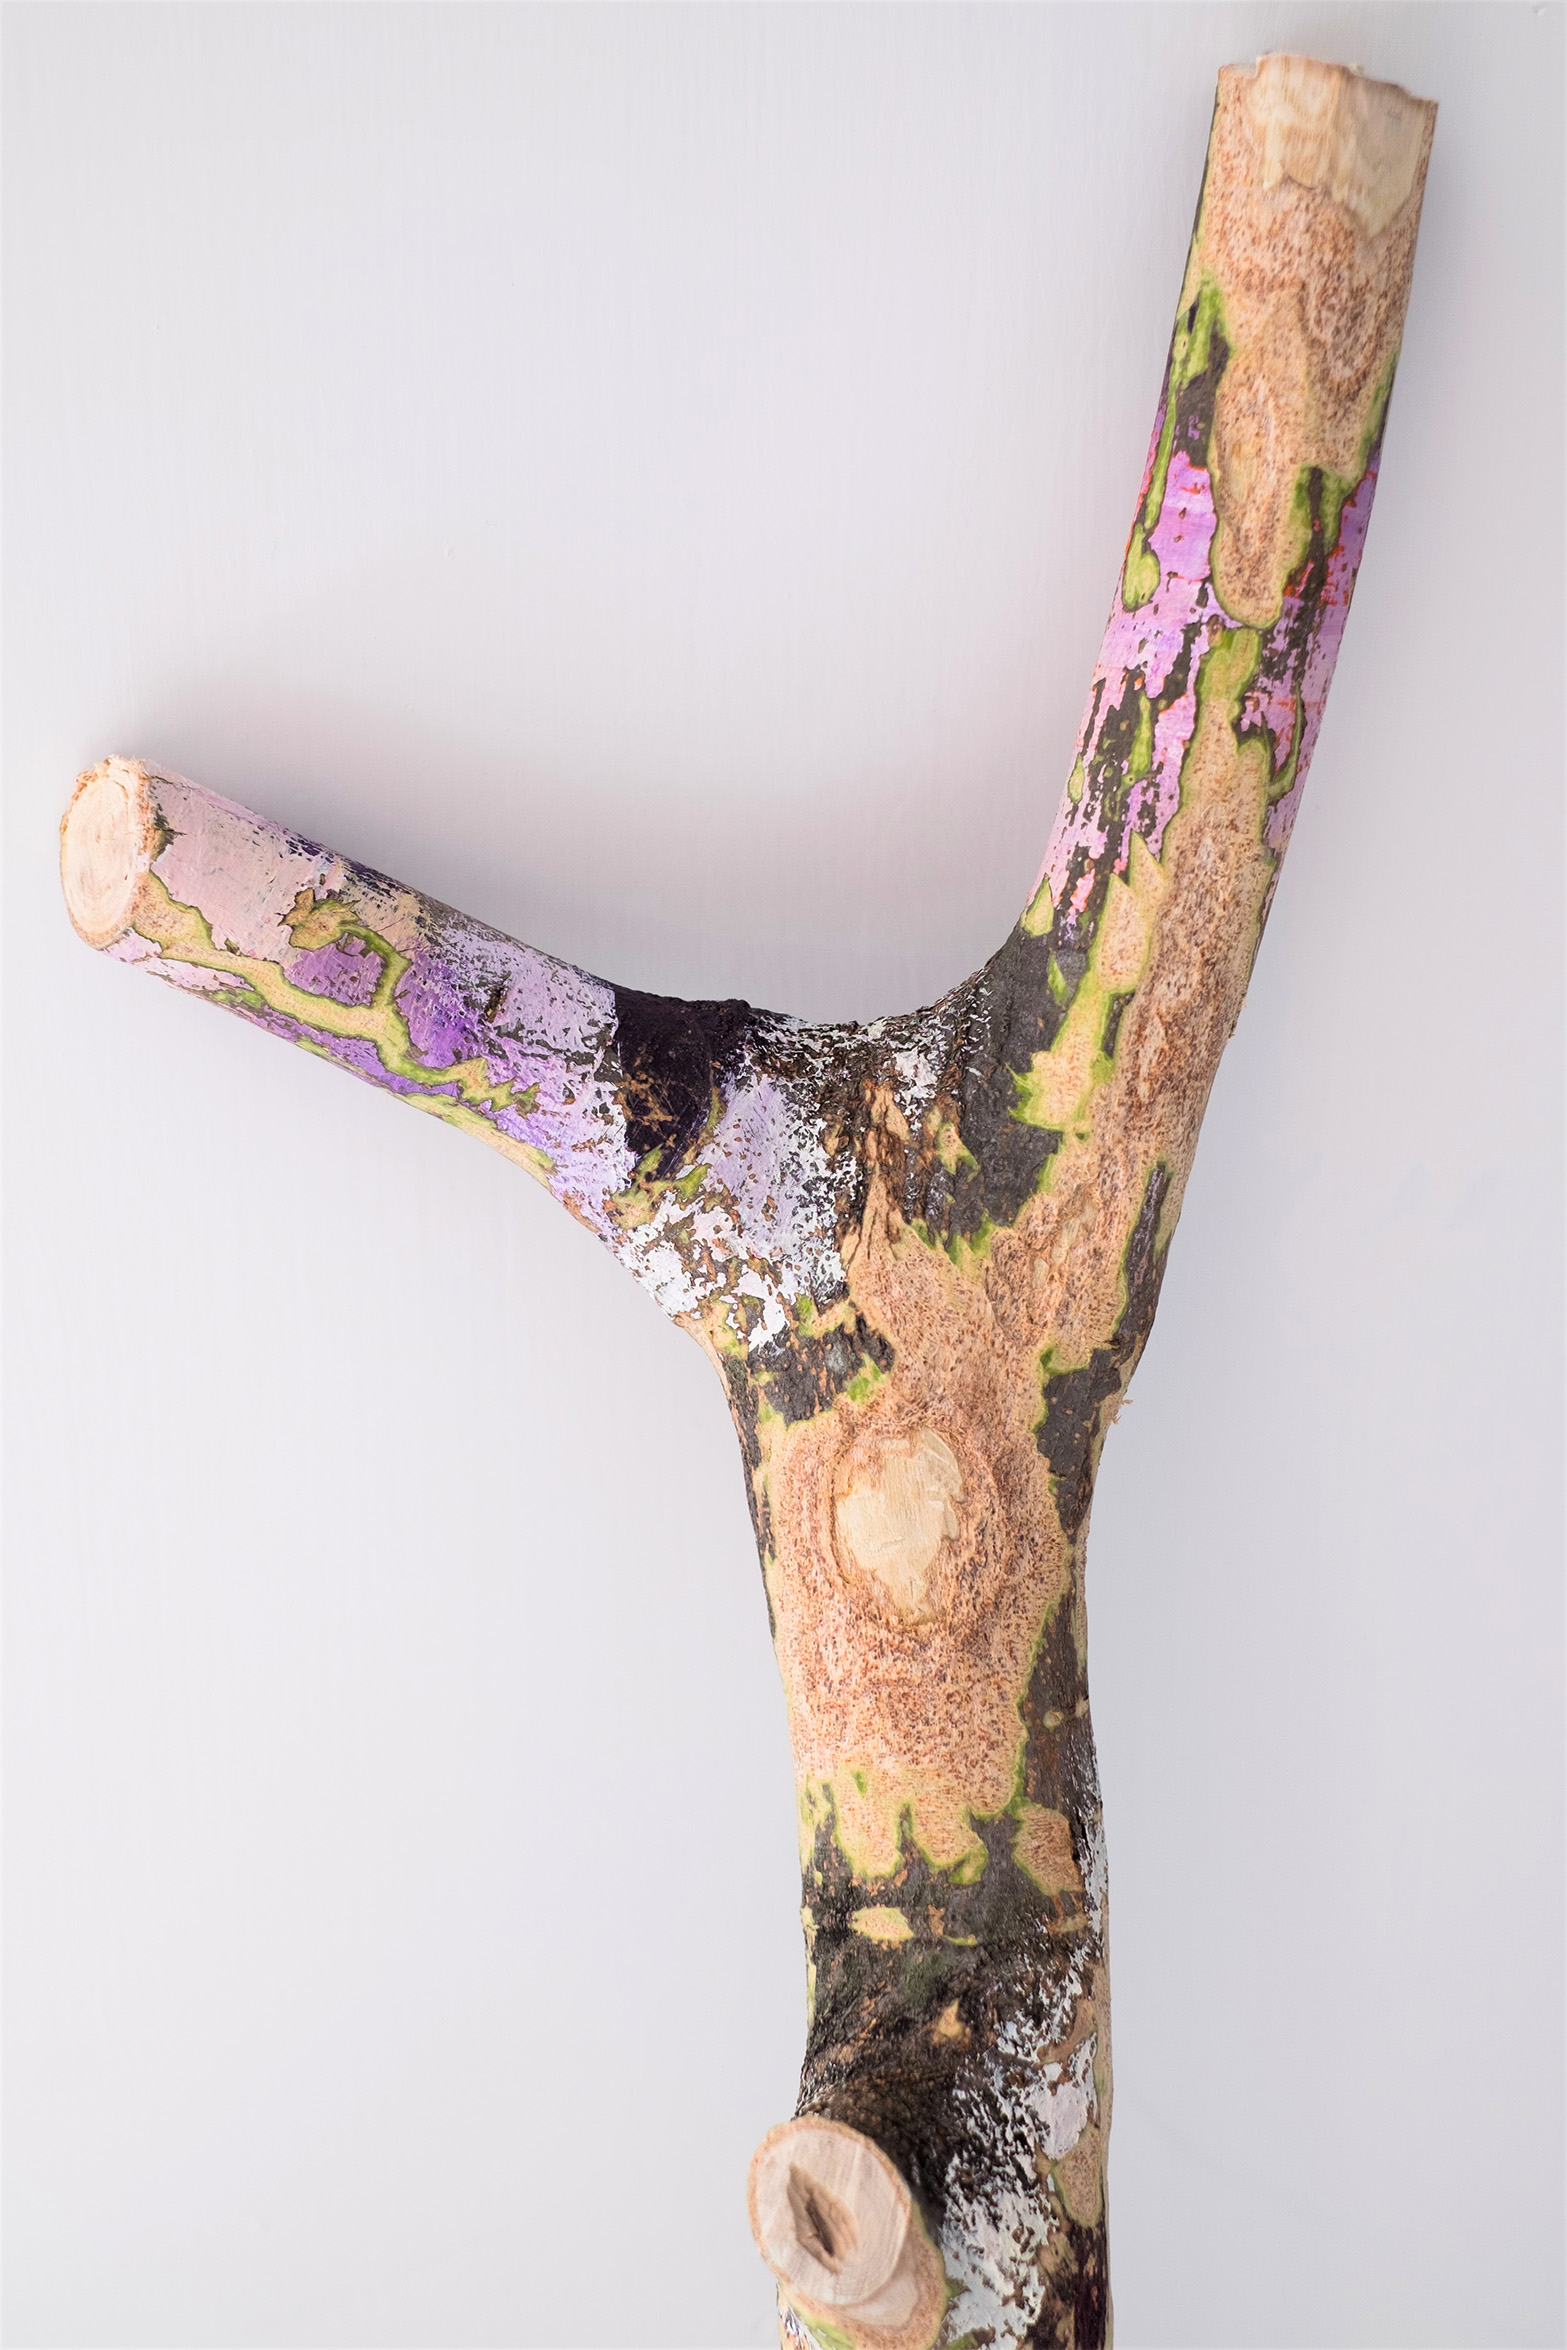  New Skin  acrylic on wood branches  dimensions variable  2015 